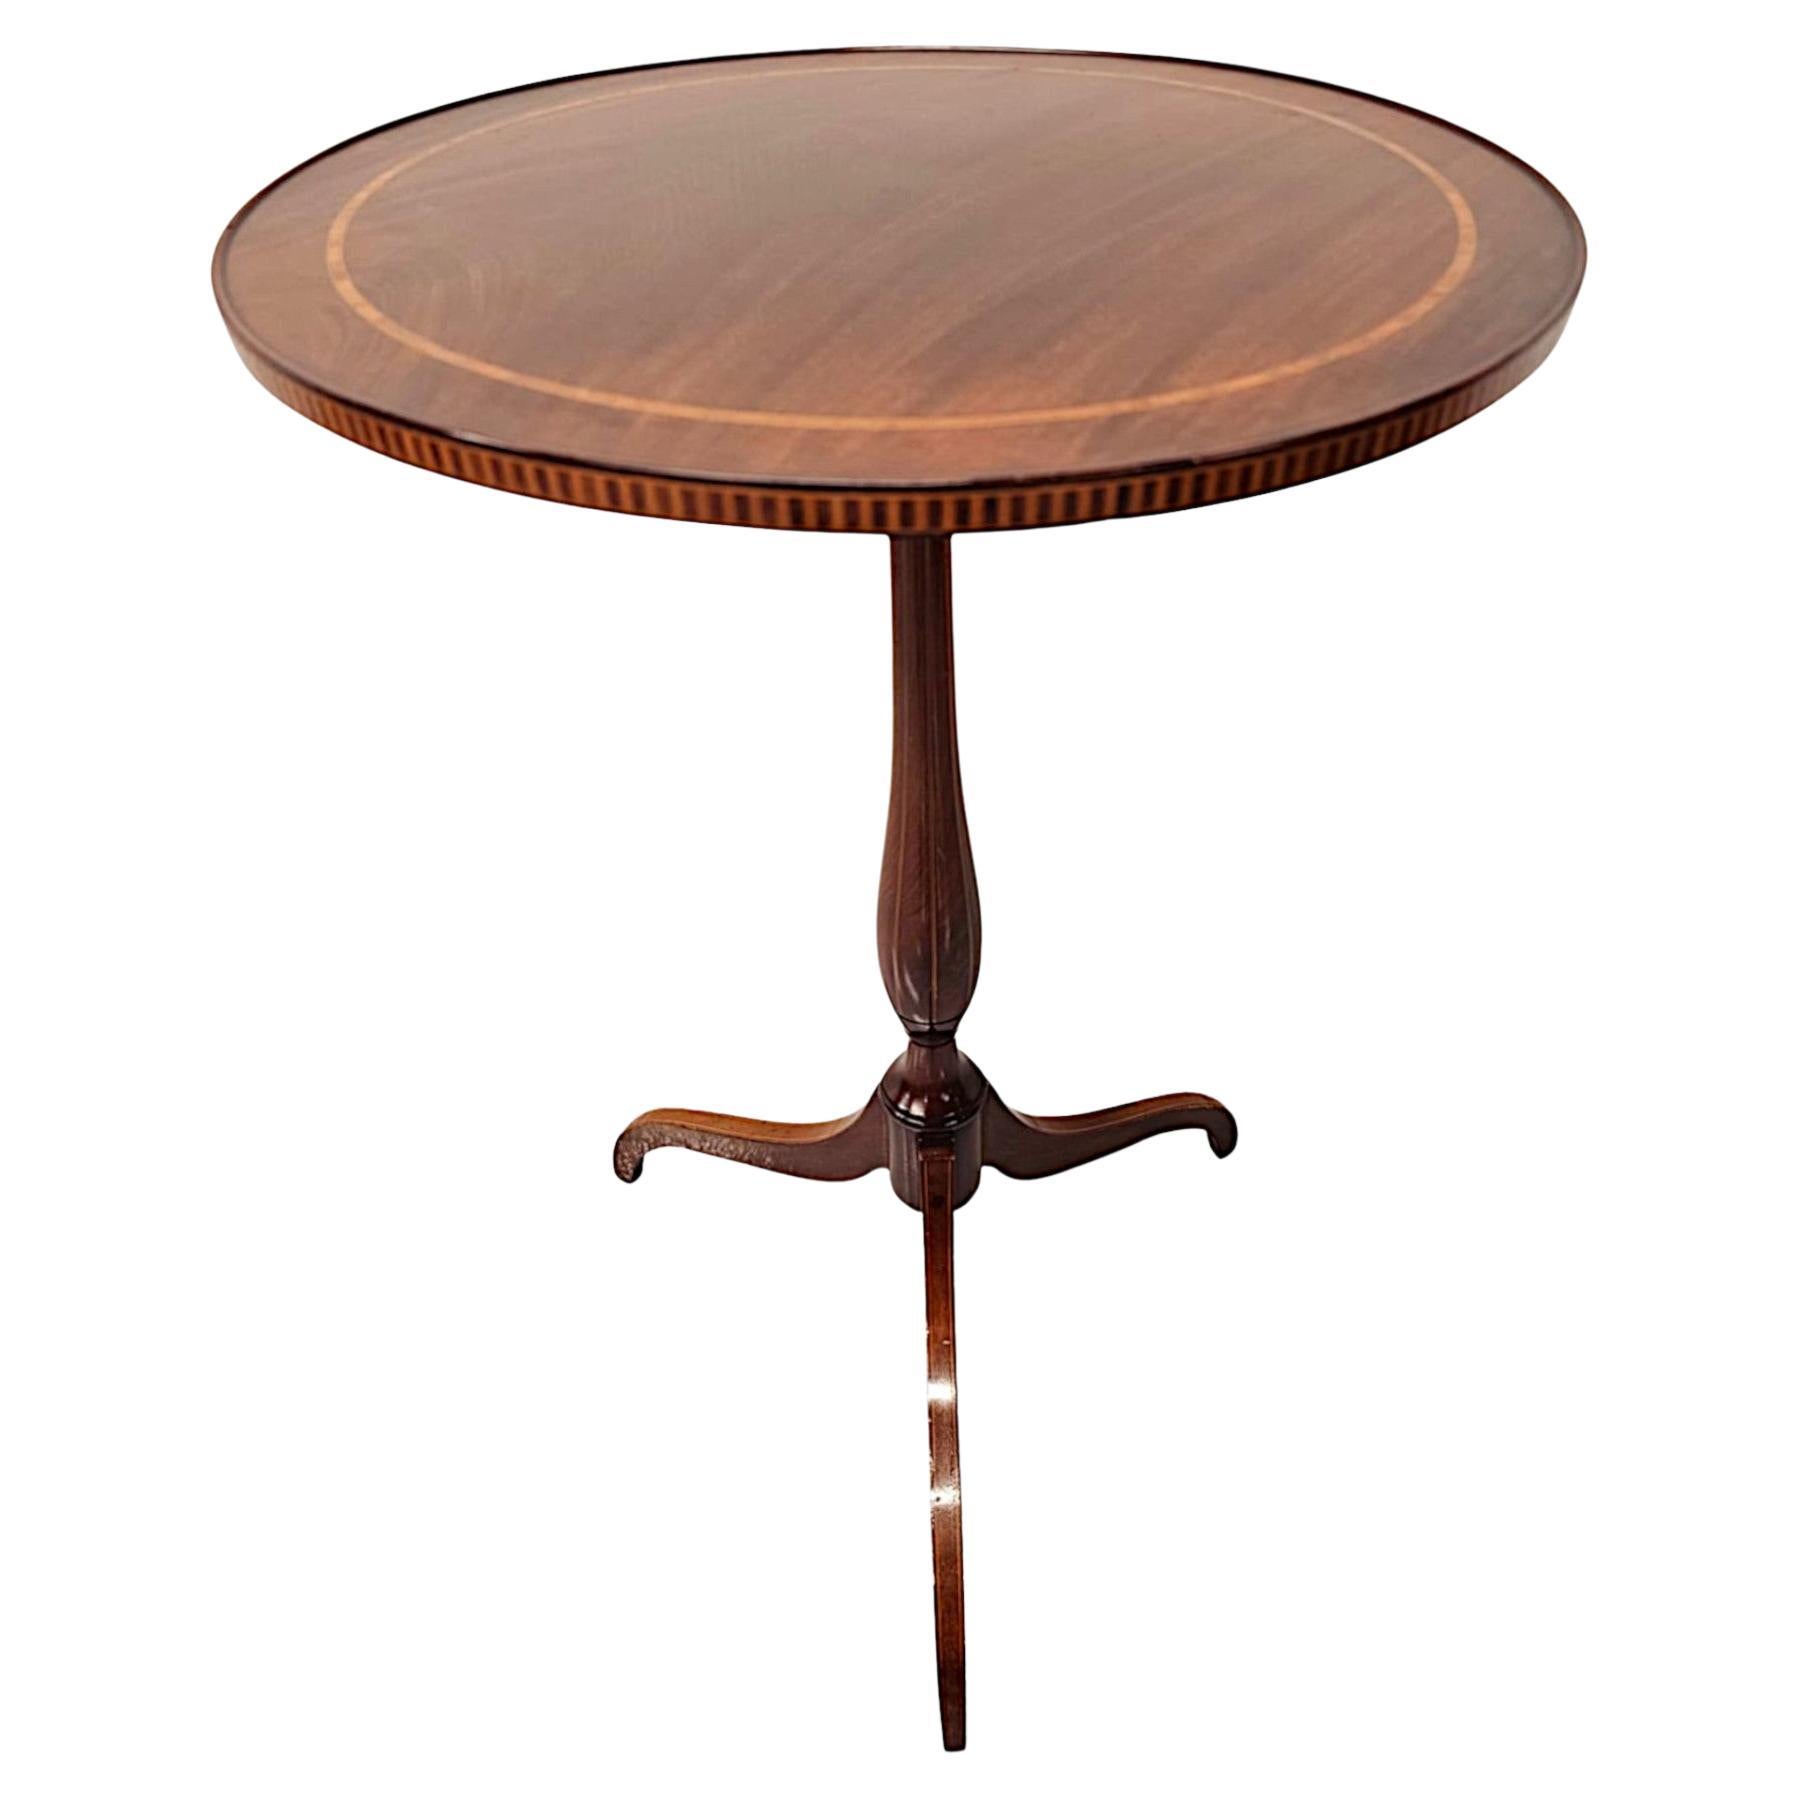 A Very Fine Edwardian Inlaid Mahogany Wine Table  For Sale